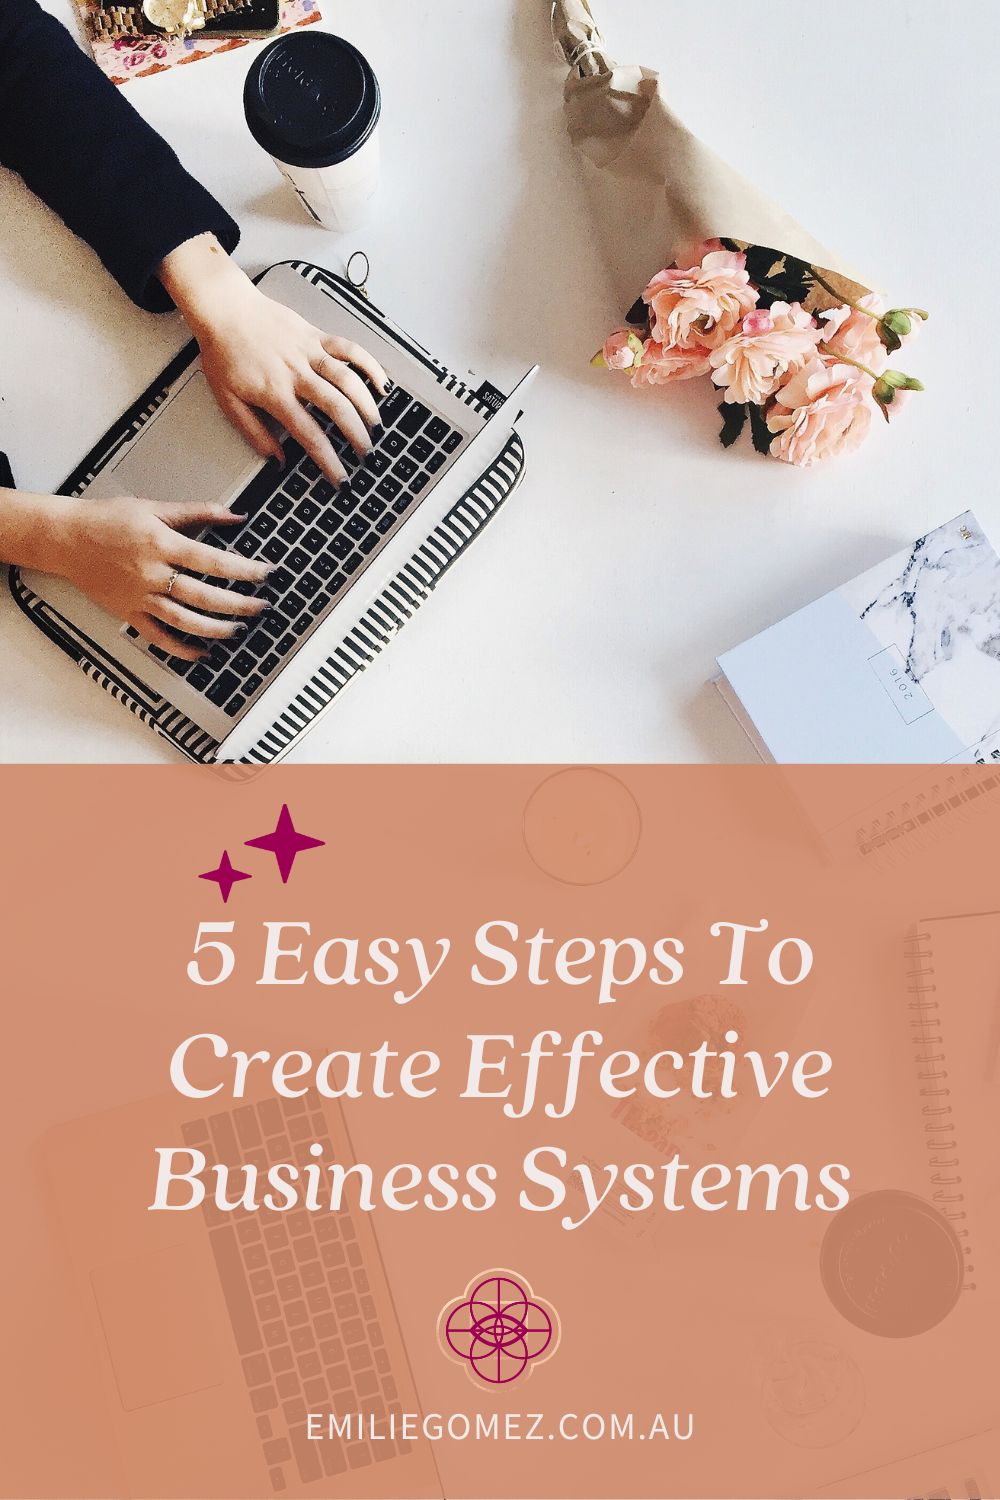 You know that your business could be better if you created some business systems that help you to work smarter not harder but you’ve been avoiding getting it done because you feel like it’ll be hard. In fact, you don’t know where to get started… This post is for you! I’m sharing 5 easy steps to create effective business systems that will help you to be more productive and run your business with ease. Click through to learn my simple process and get your systems in order once and for all!